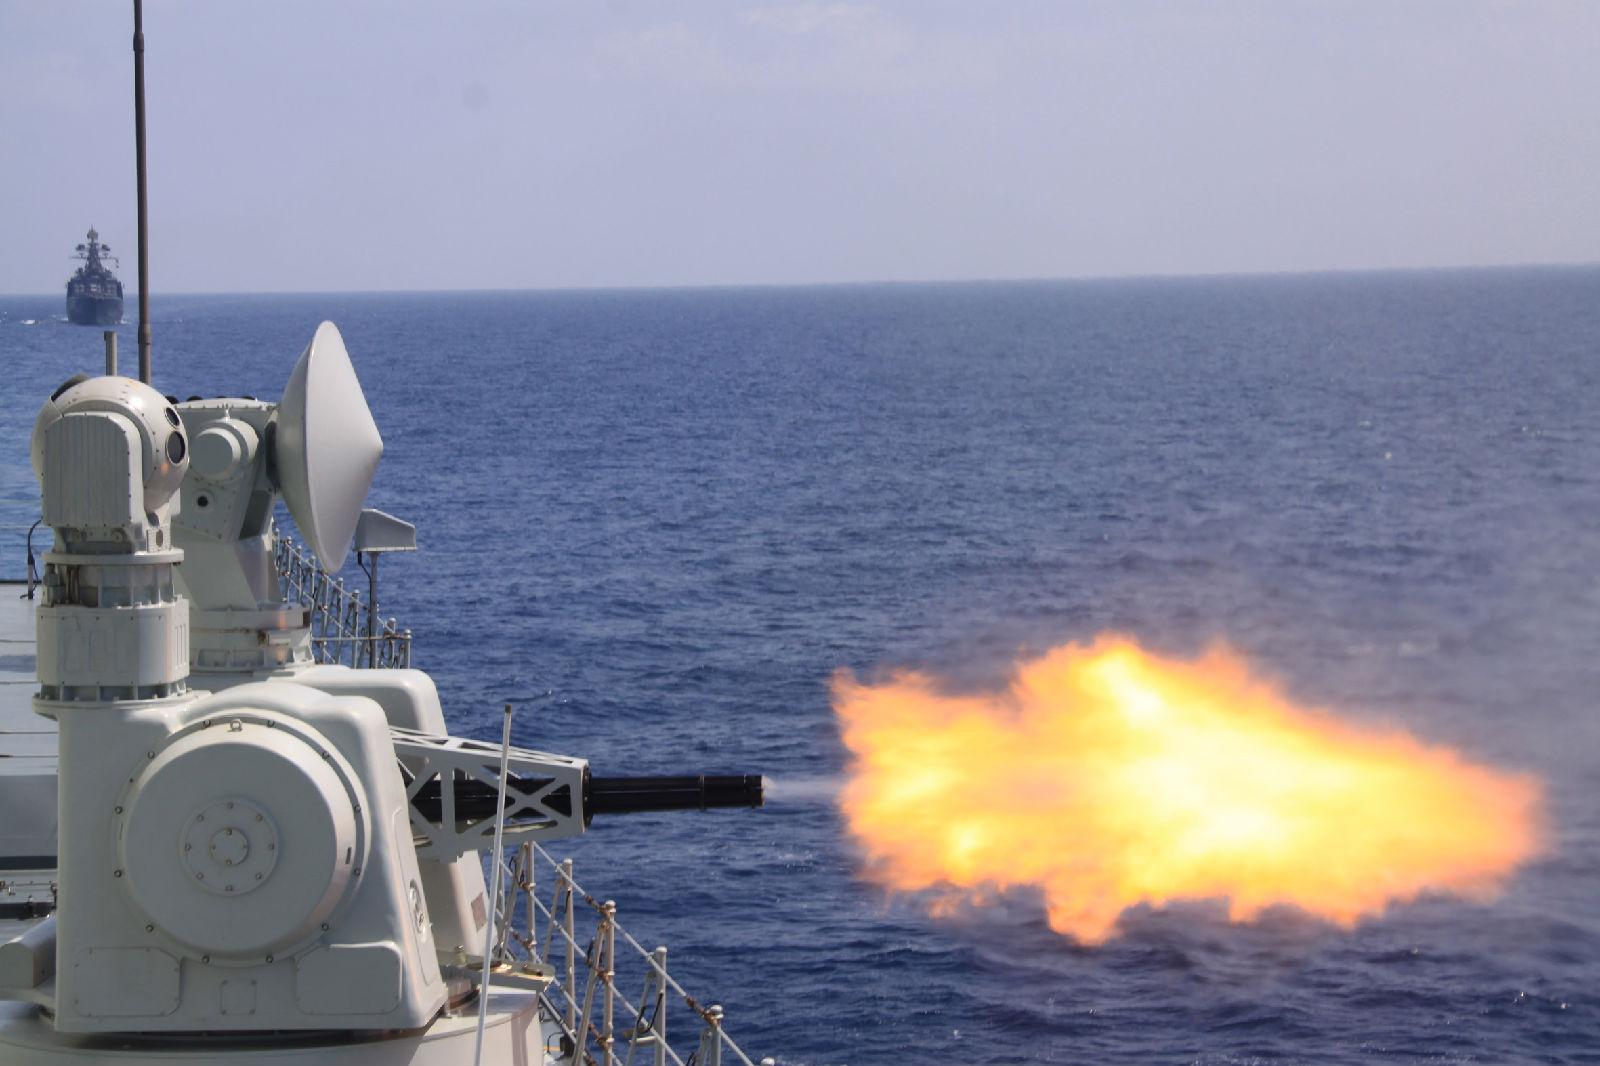 Type+052C+%2528Luyang-II+Class%2529+Missile+Destroyer+are+also+equipped+with+two+seven+barrel+Type+730+close-in+weapon+systems+%2528CIWS%2529+which+has+a+firing+rate+of+4%252C600%257E5%252C800+roundsminute+at+a+maximum+firing+range+of+3%252C0+%252810%2529.jpg